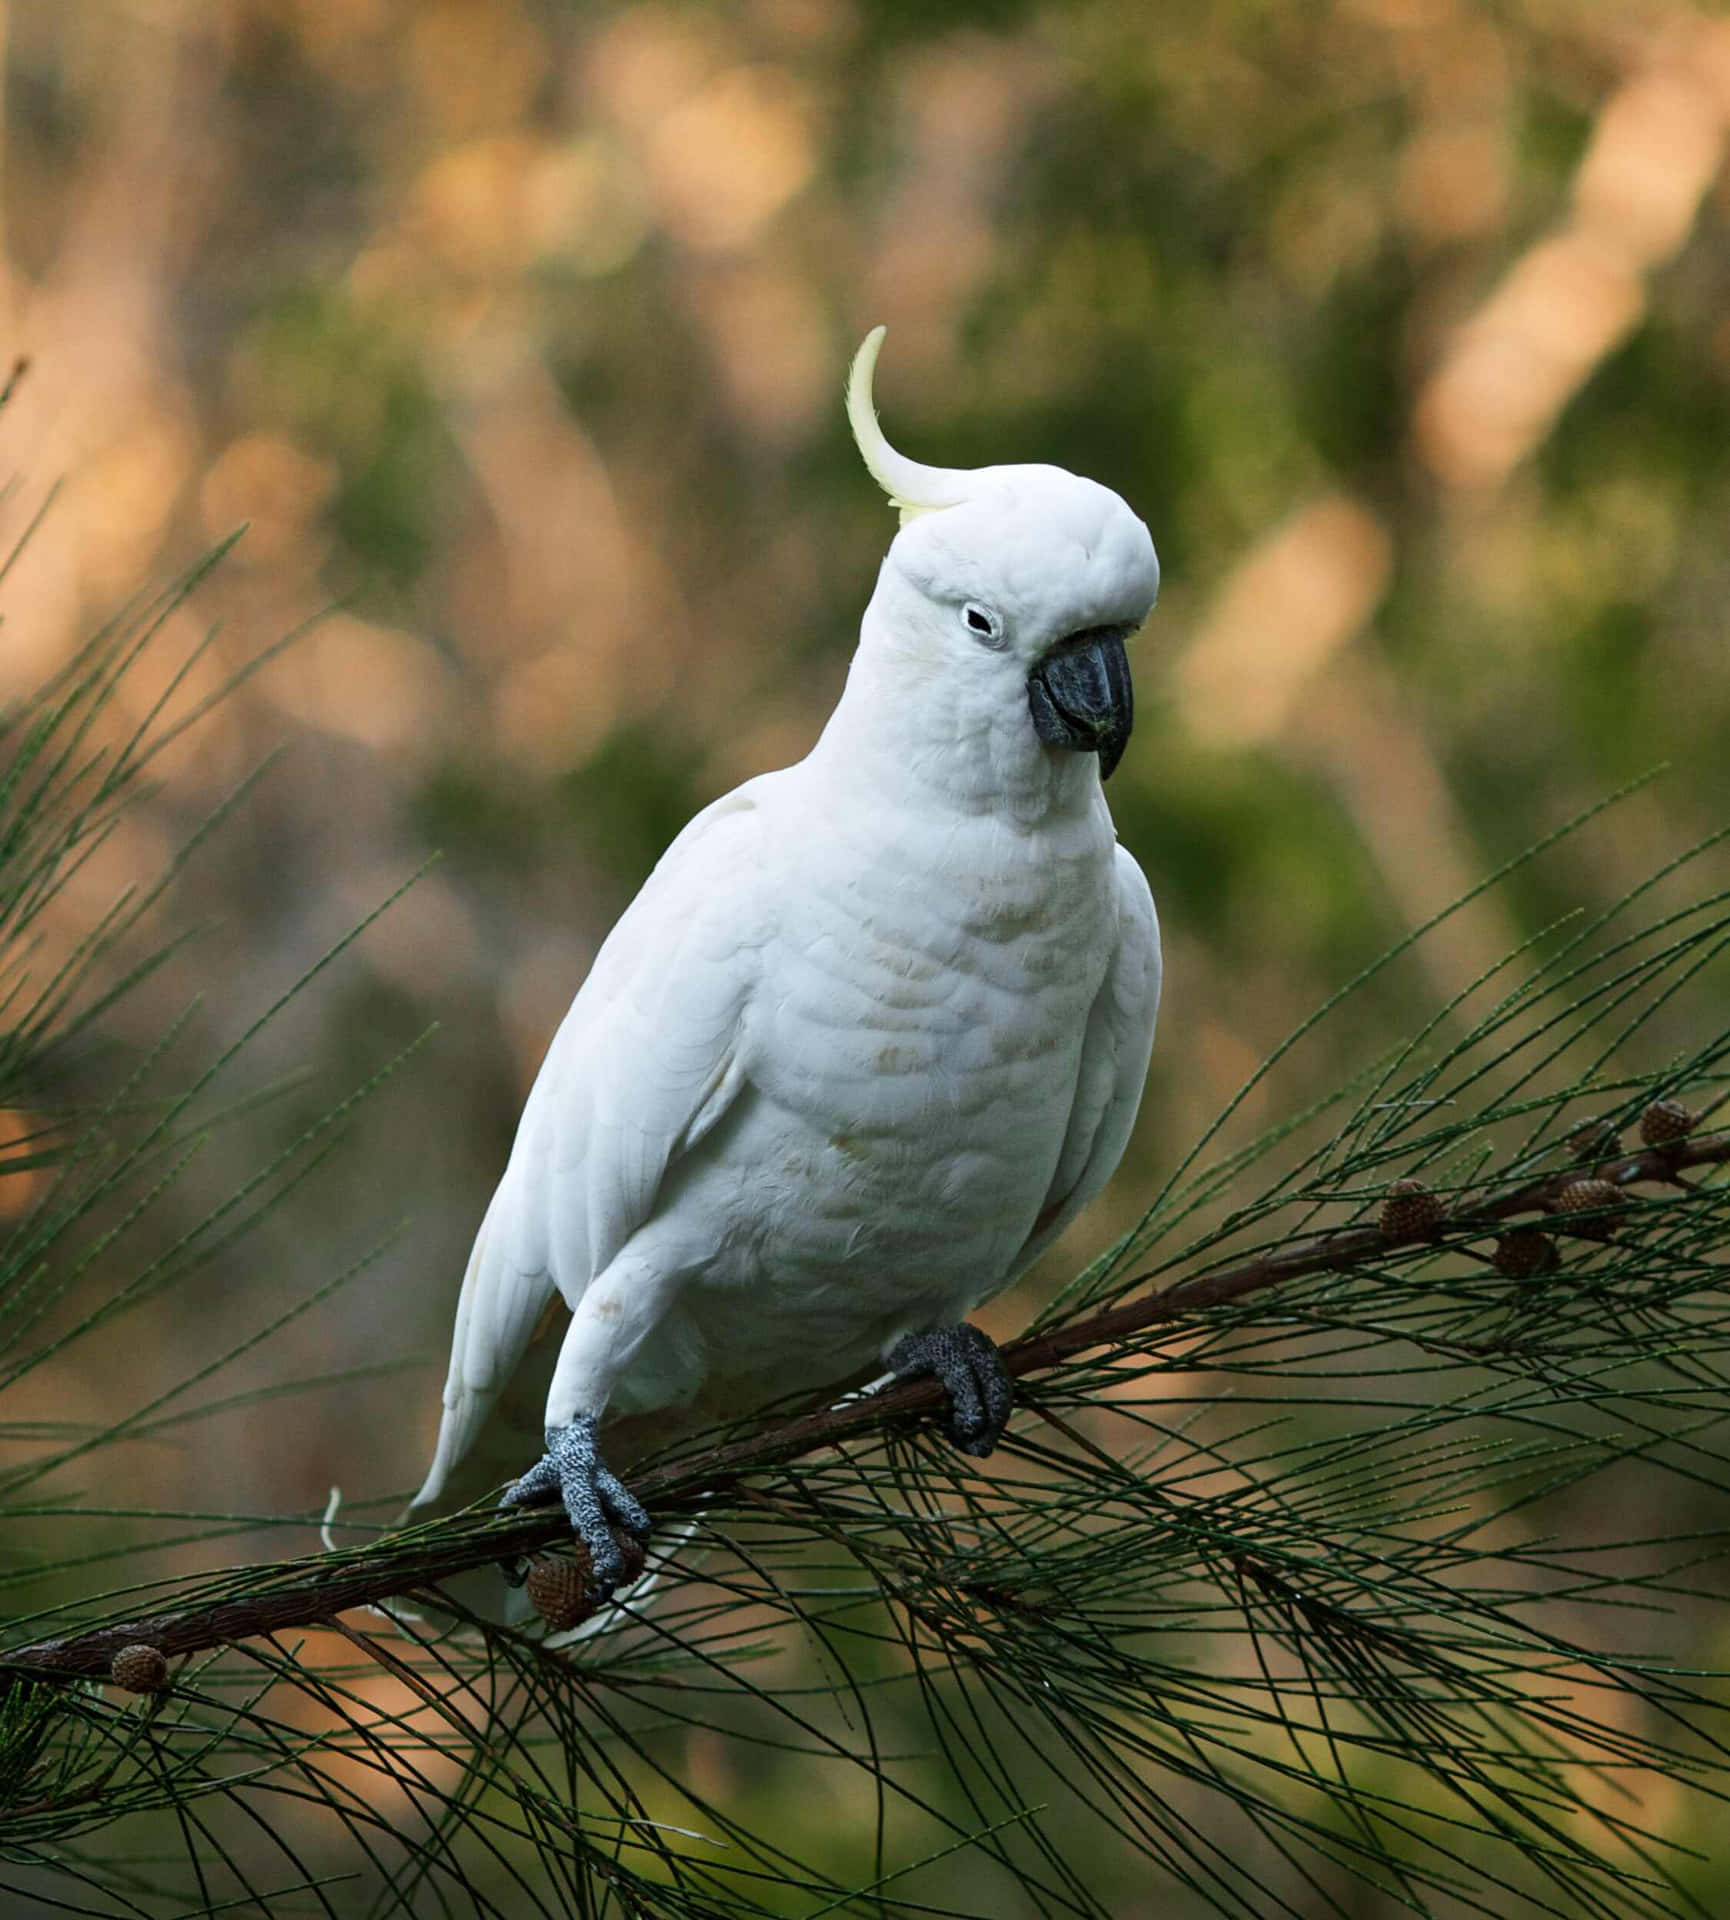 Majestic_ Cockatoo_ Perched_ Outdoors.jpg Wallpaper